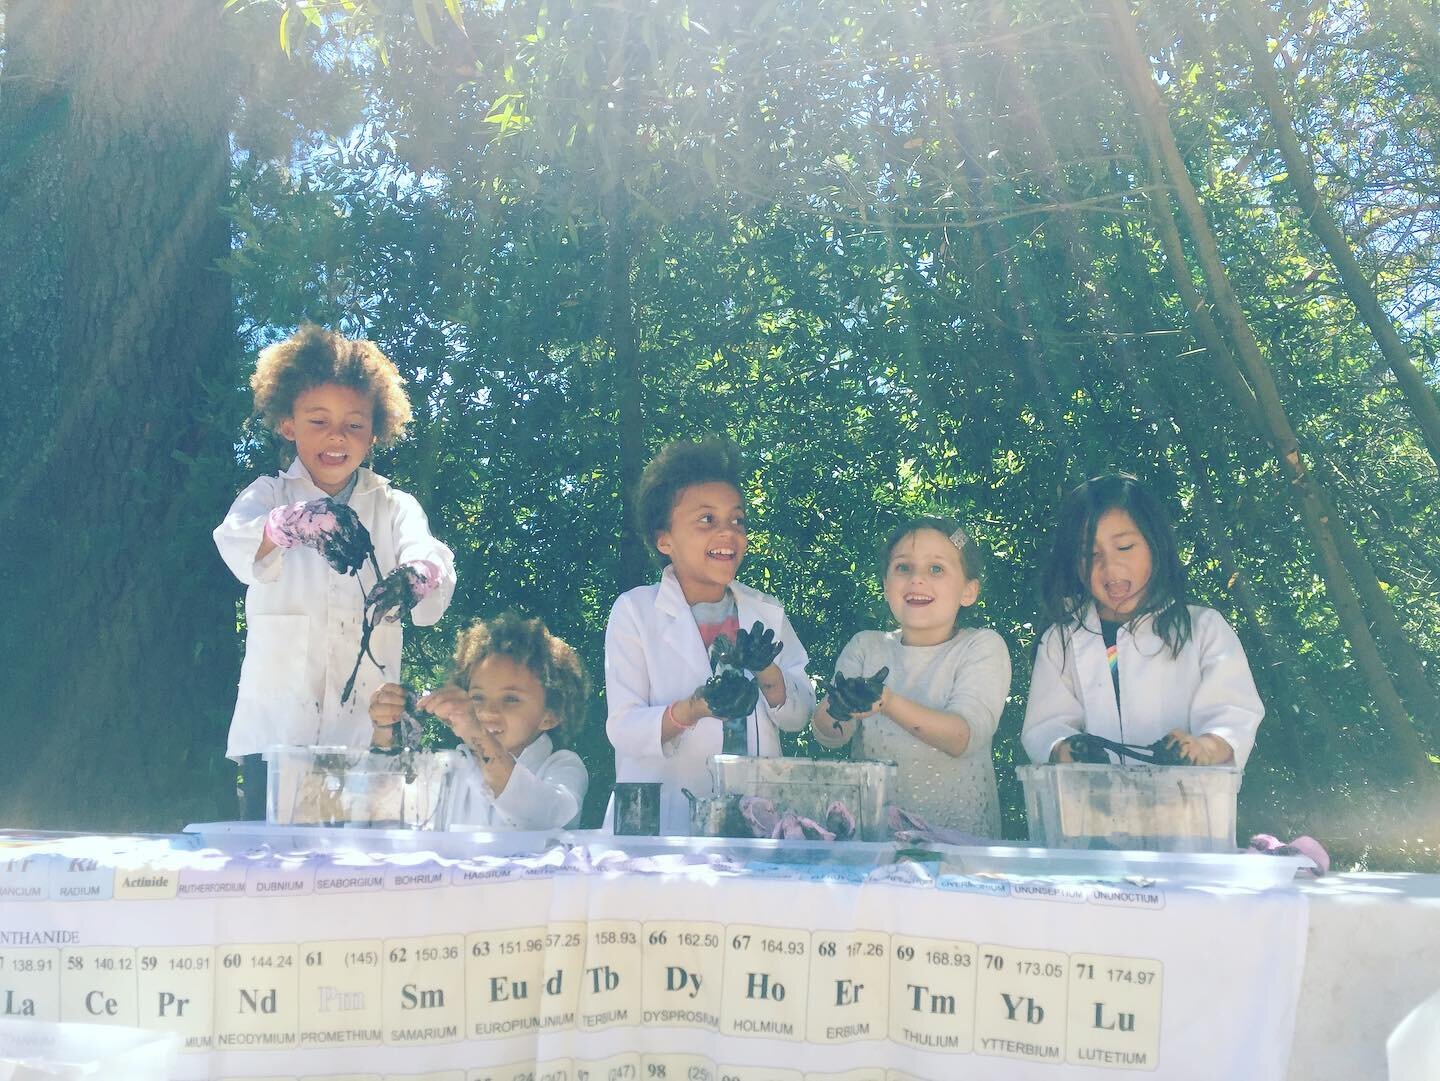 Exploring the physical properties of substances that are either magnetic or non-magnetic at The Perigee&rsquo;s Camp Chemistry last summer. 
🍃
I love experience oriented science and in the later years continuing to develop the same base concepts suc